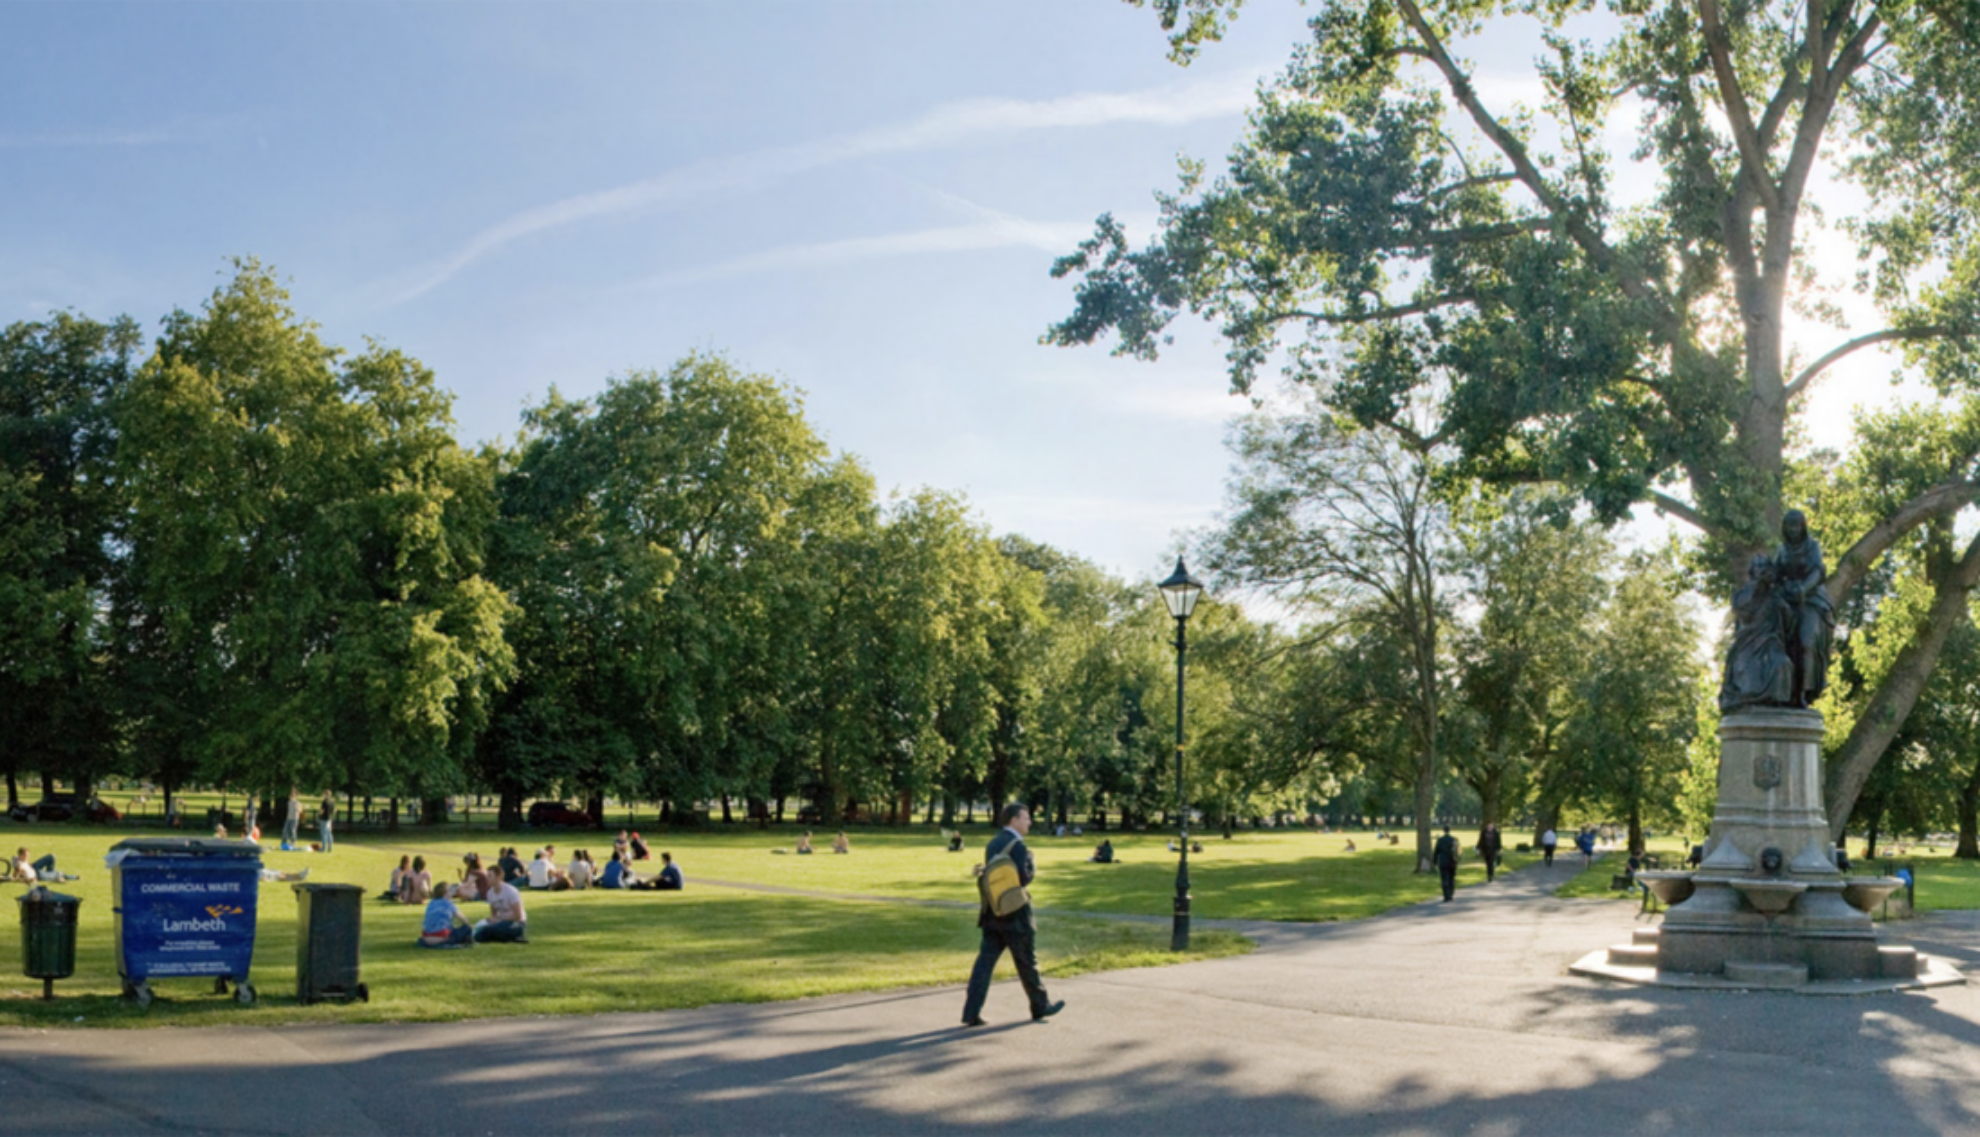 Clapham Common on a summer's day